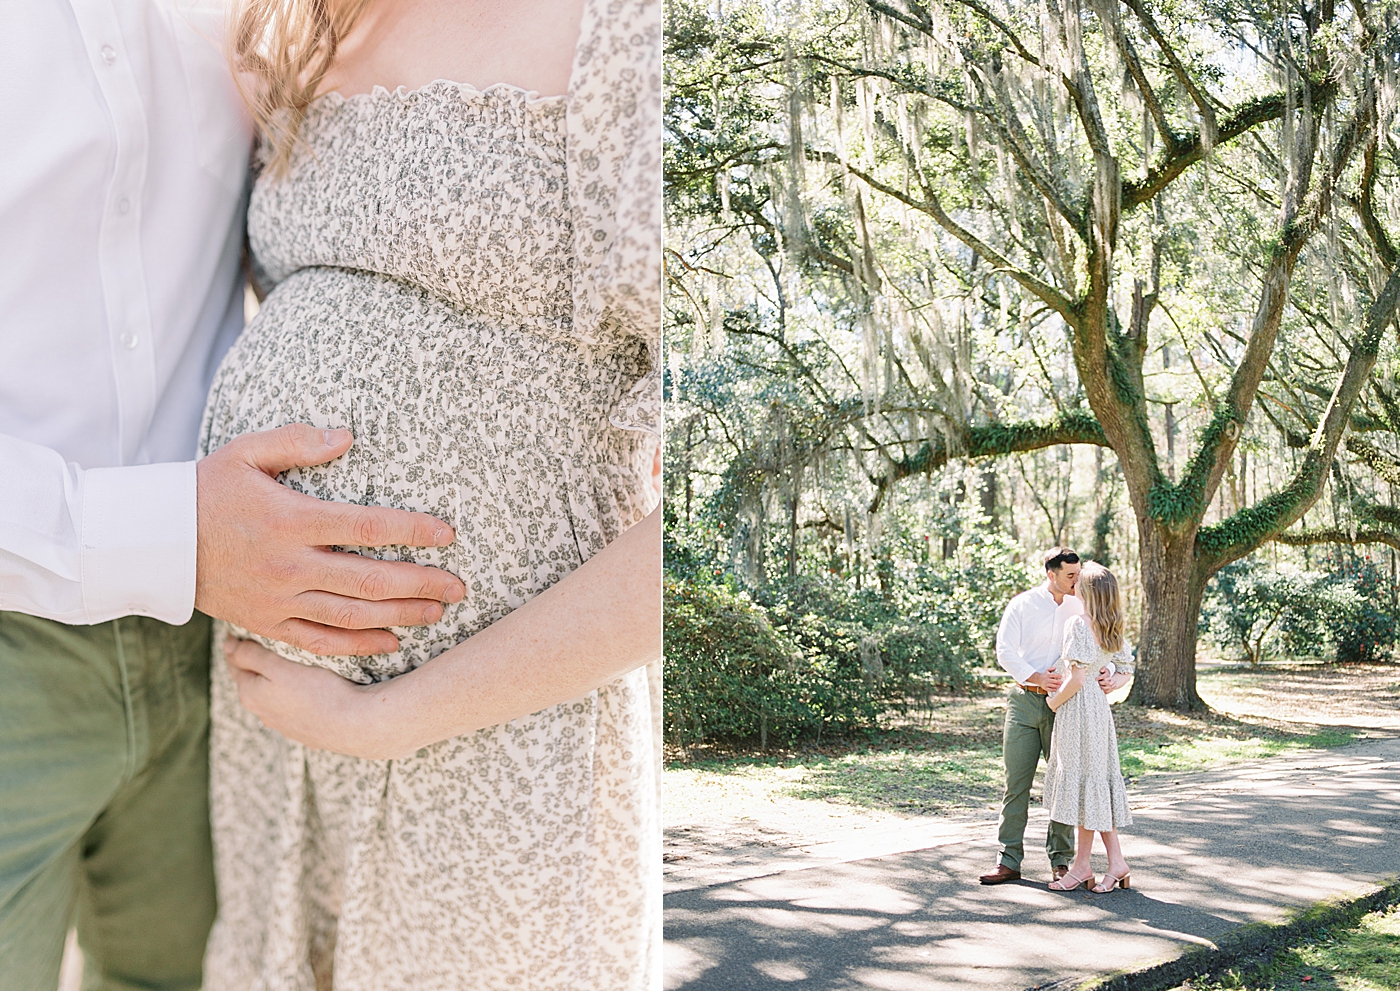 Side-by-side images of details of husband and wife in a spring dress holding her pregnant belly, kissing, and walking on an oak tree-lined walkway during their Maternity Session at Charlestowne Landing| Image by Caitlyn Motycka Photography